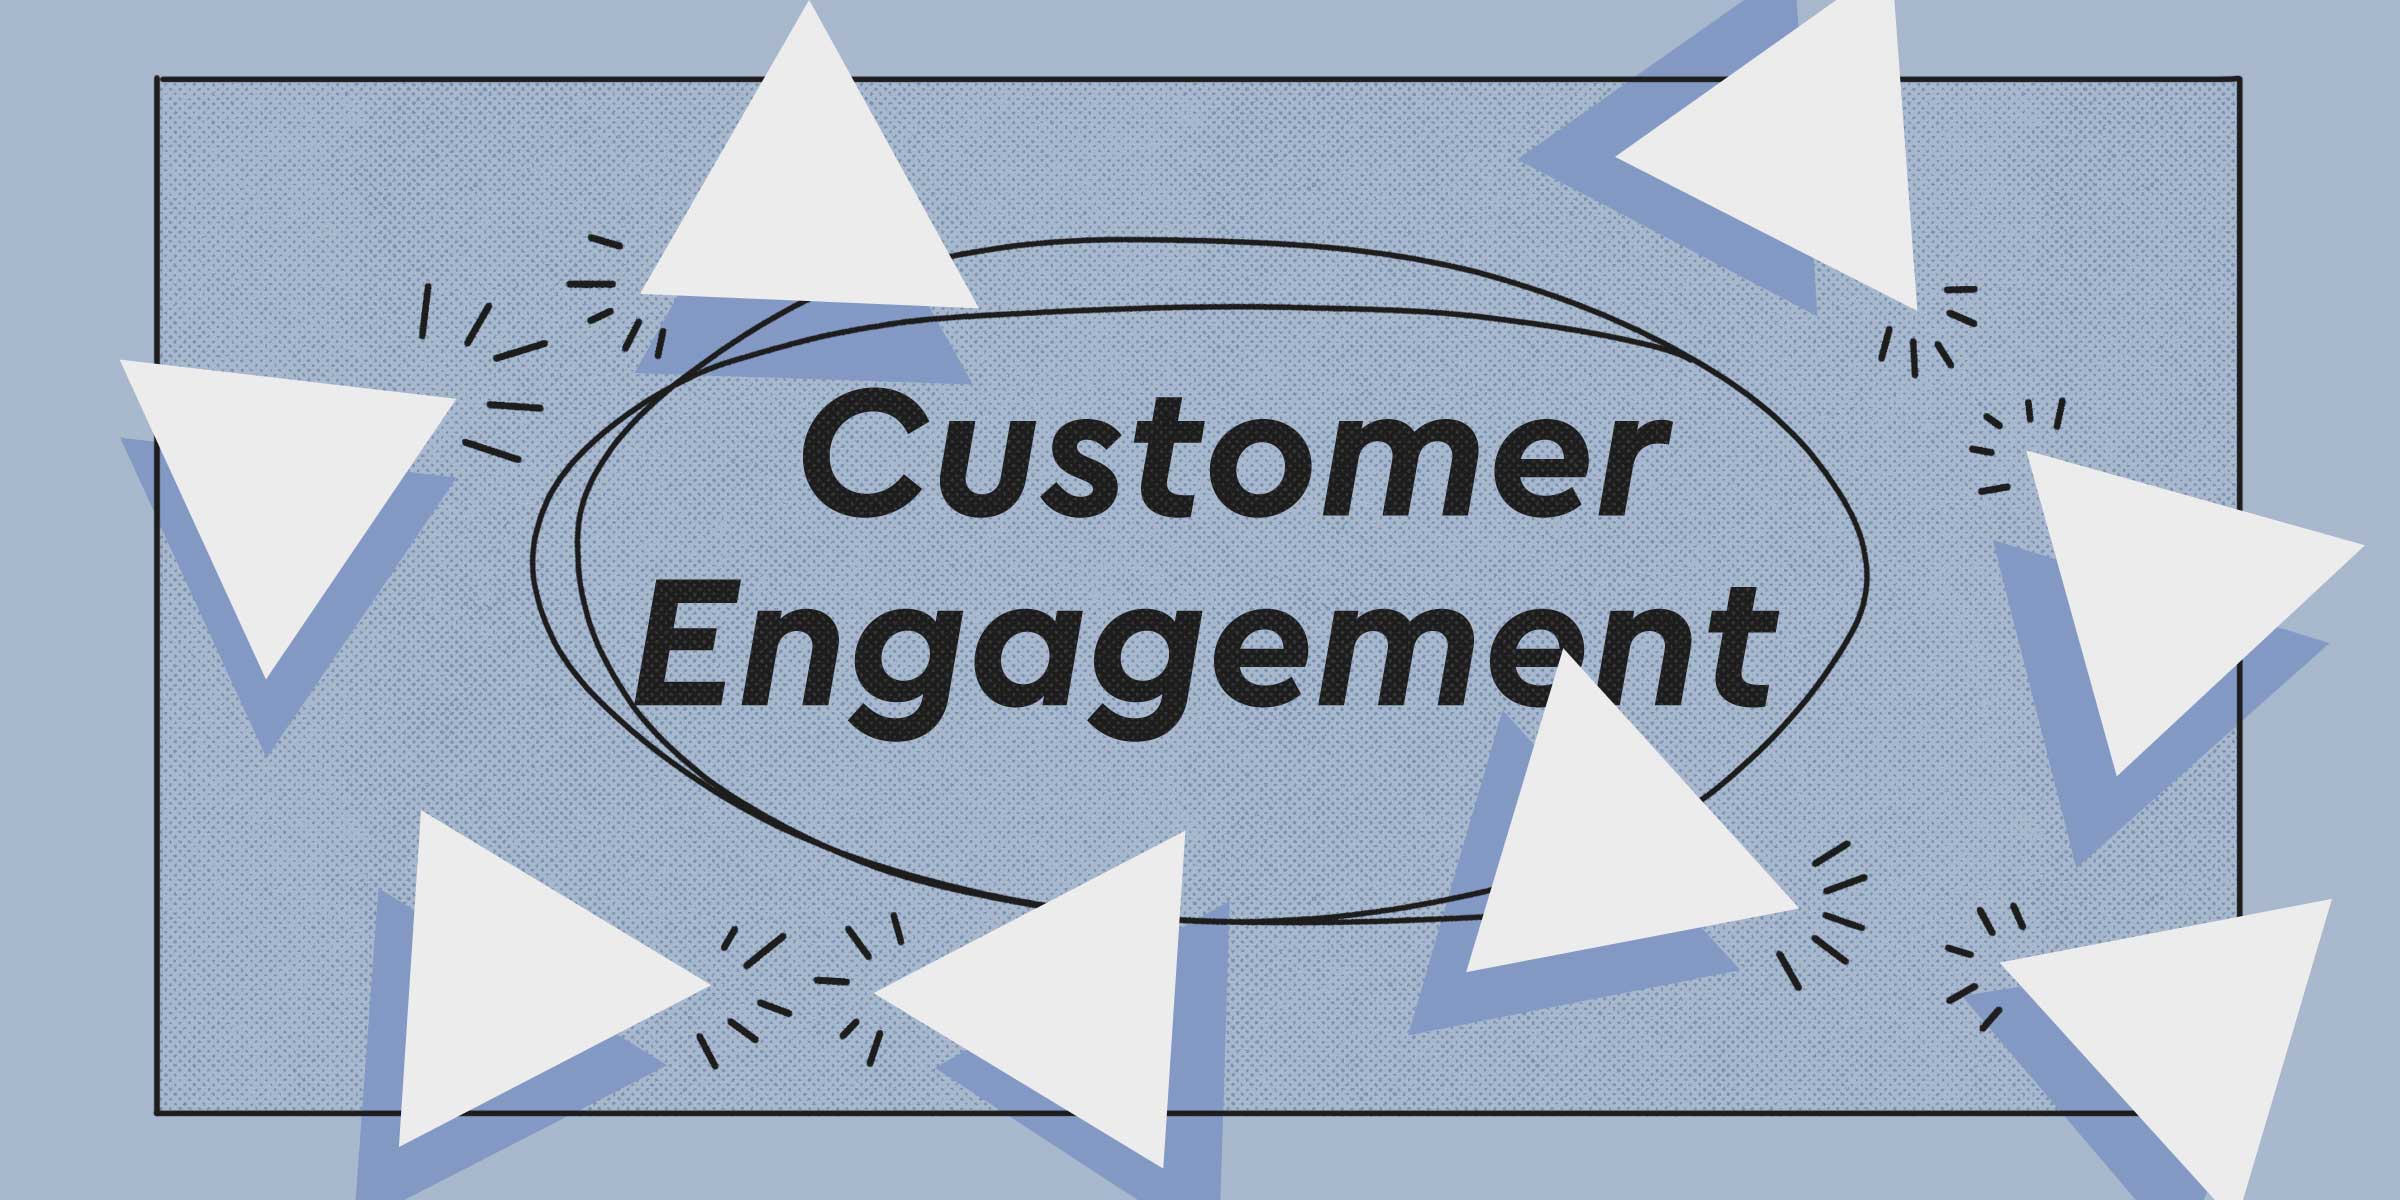 Smart CRM Basics: Customer Engagement Strategies You Don’t Want to Miss